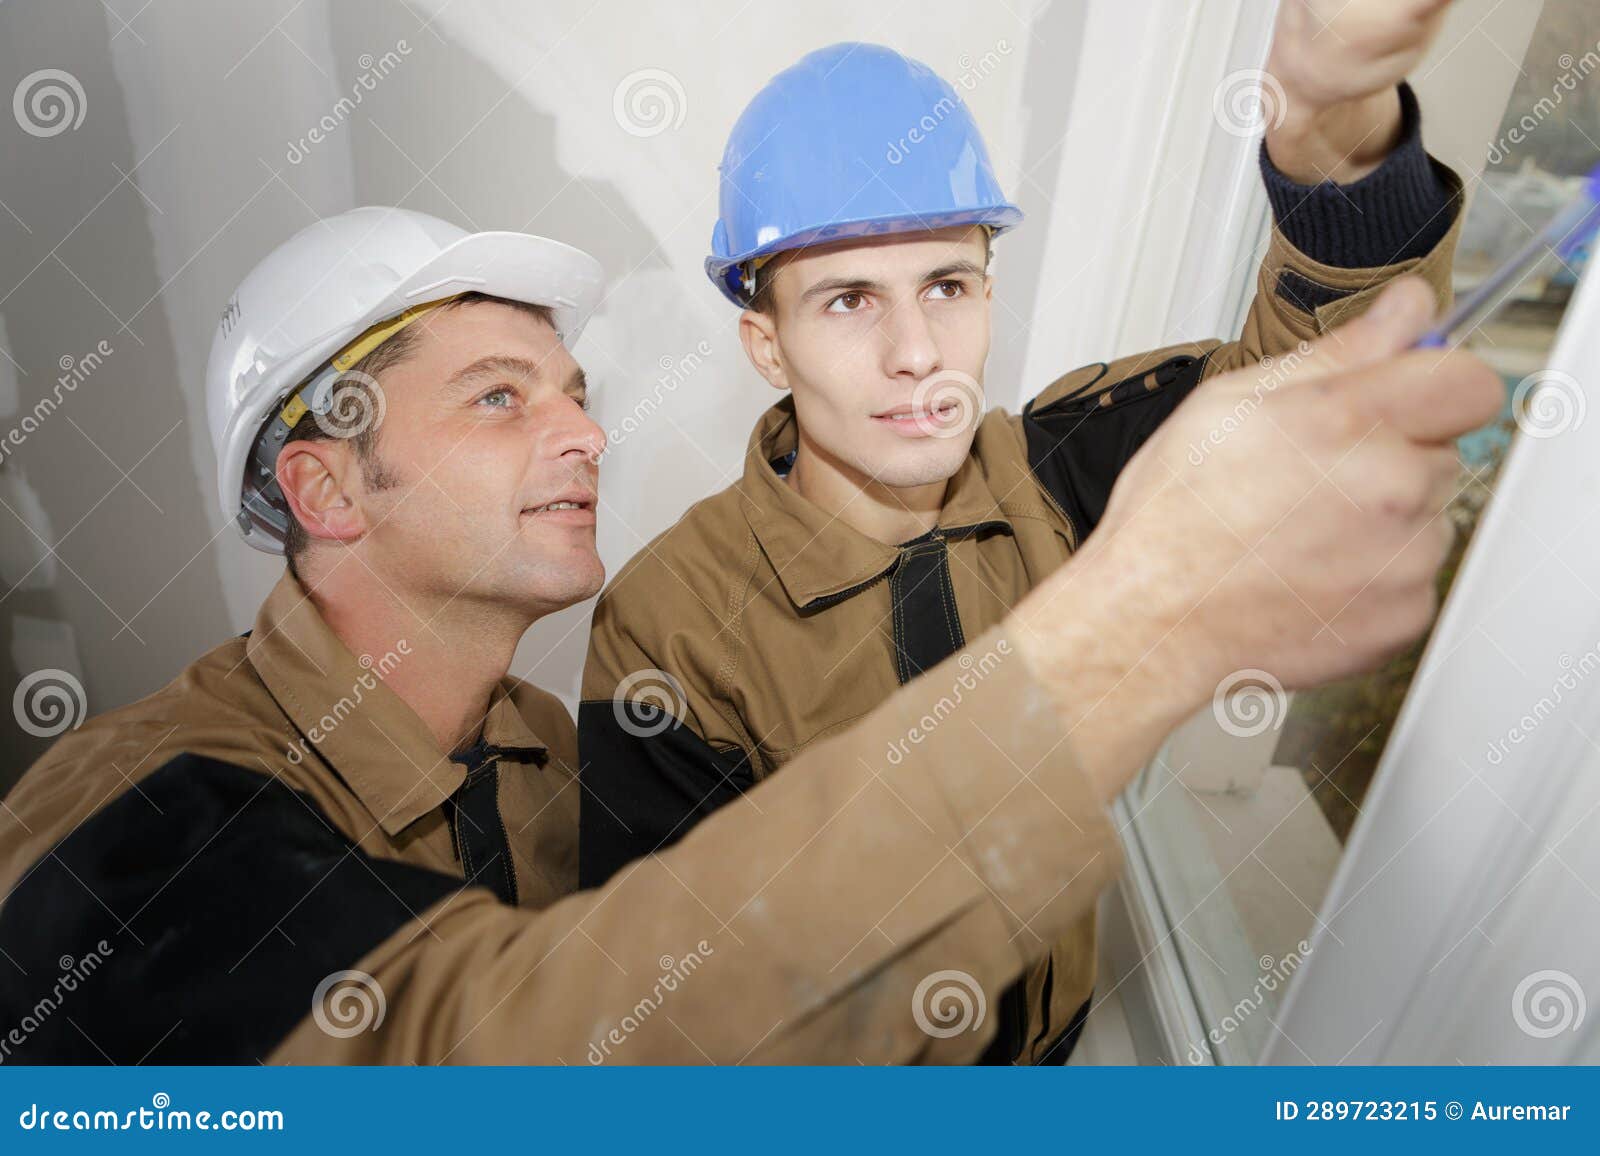 construction workers cleaning joints